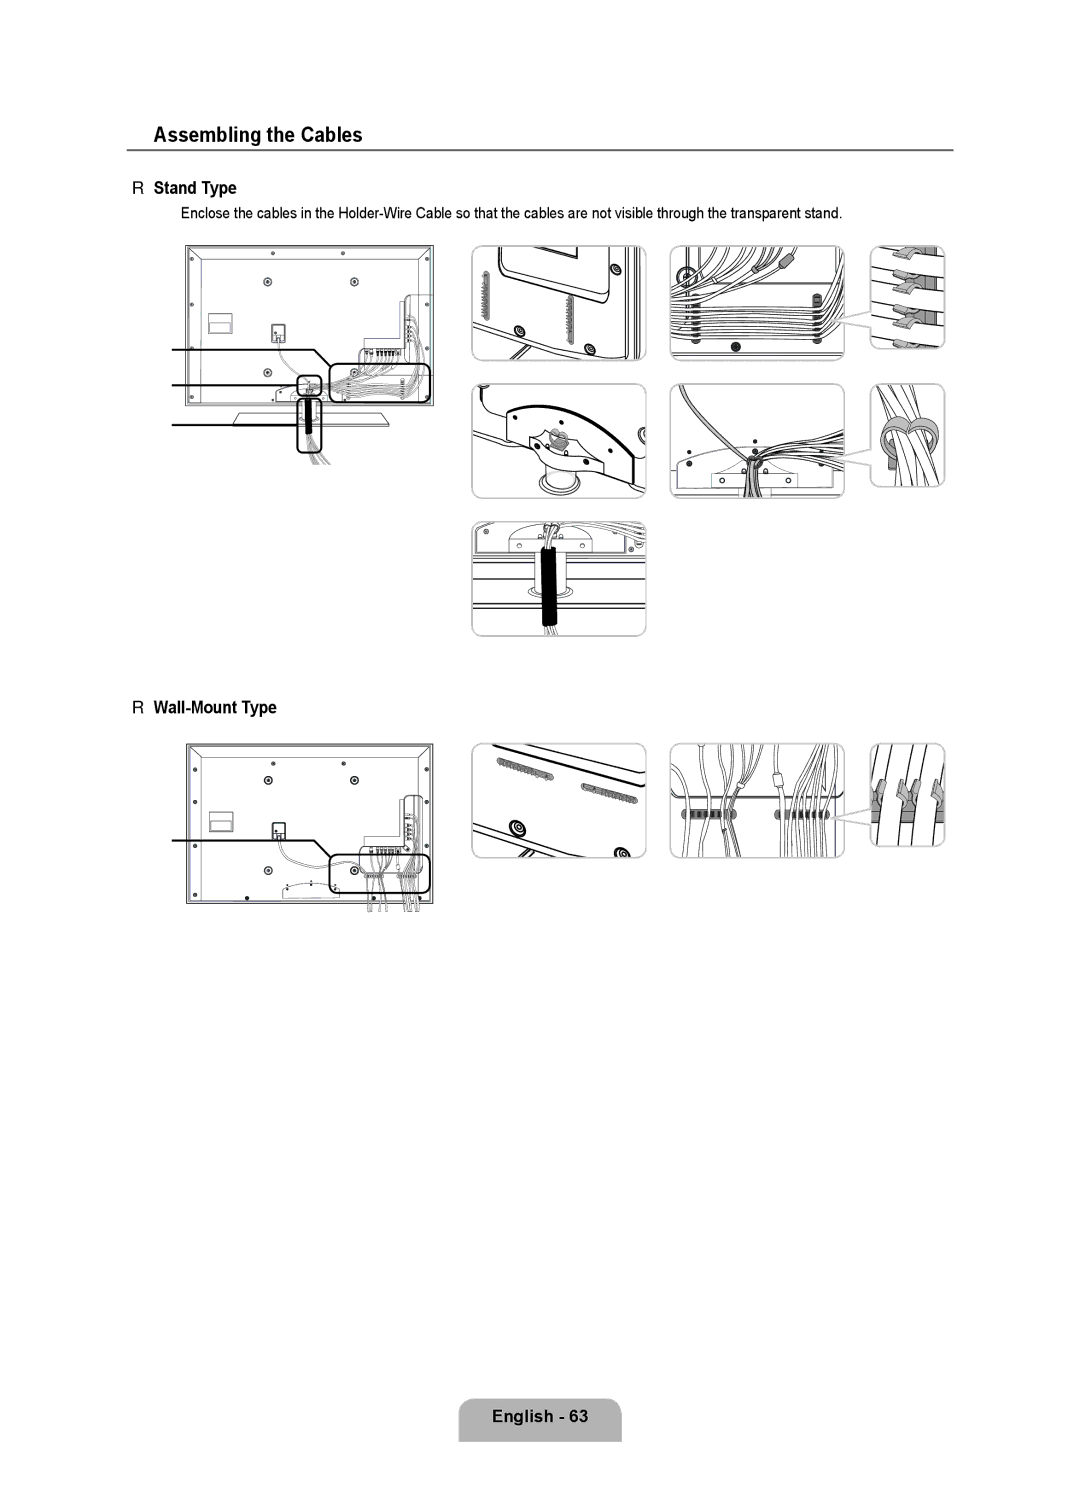 Samsung Series L6 user manual Assembling the Cables, Stand Type, Wall-Mount Type English  